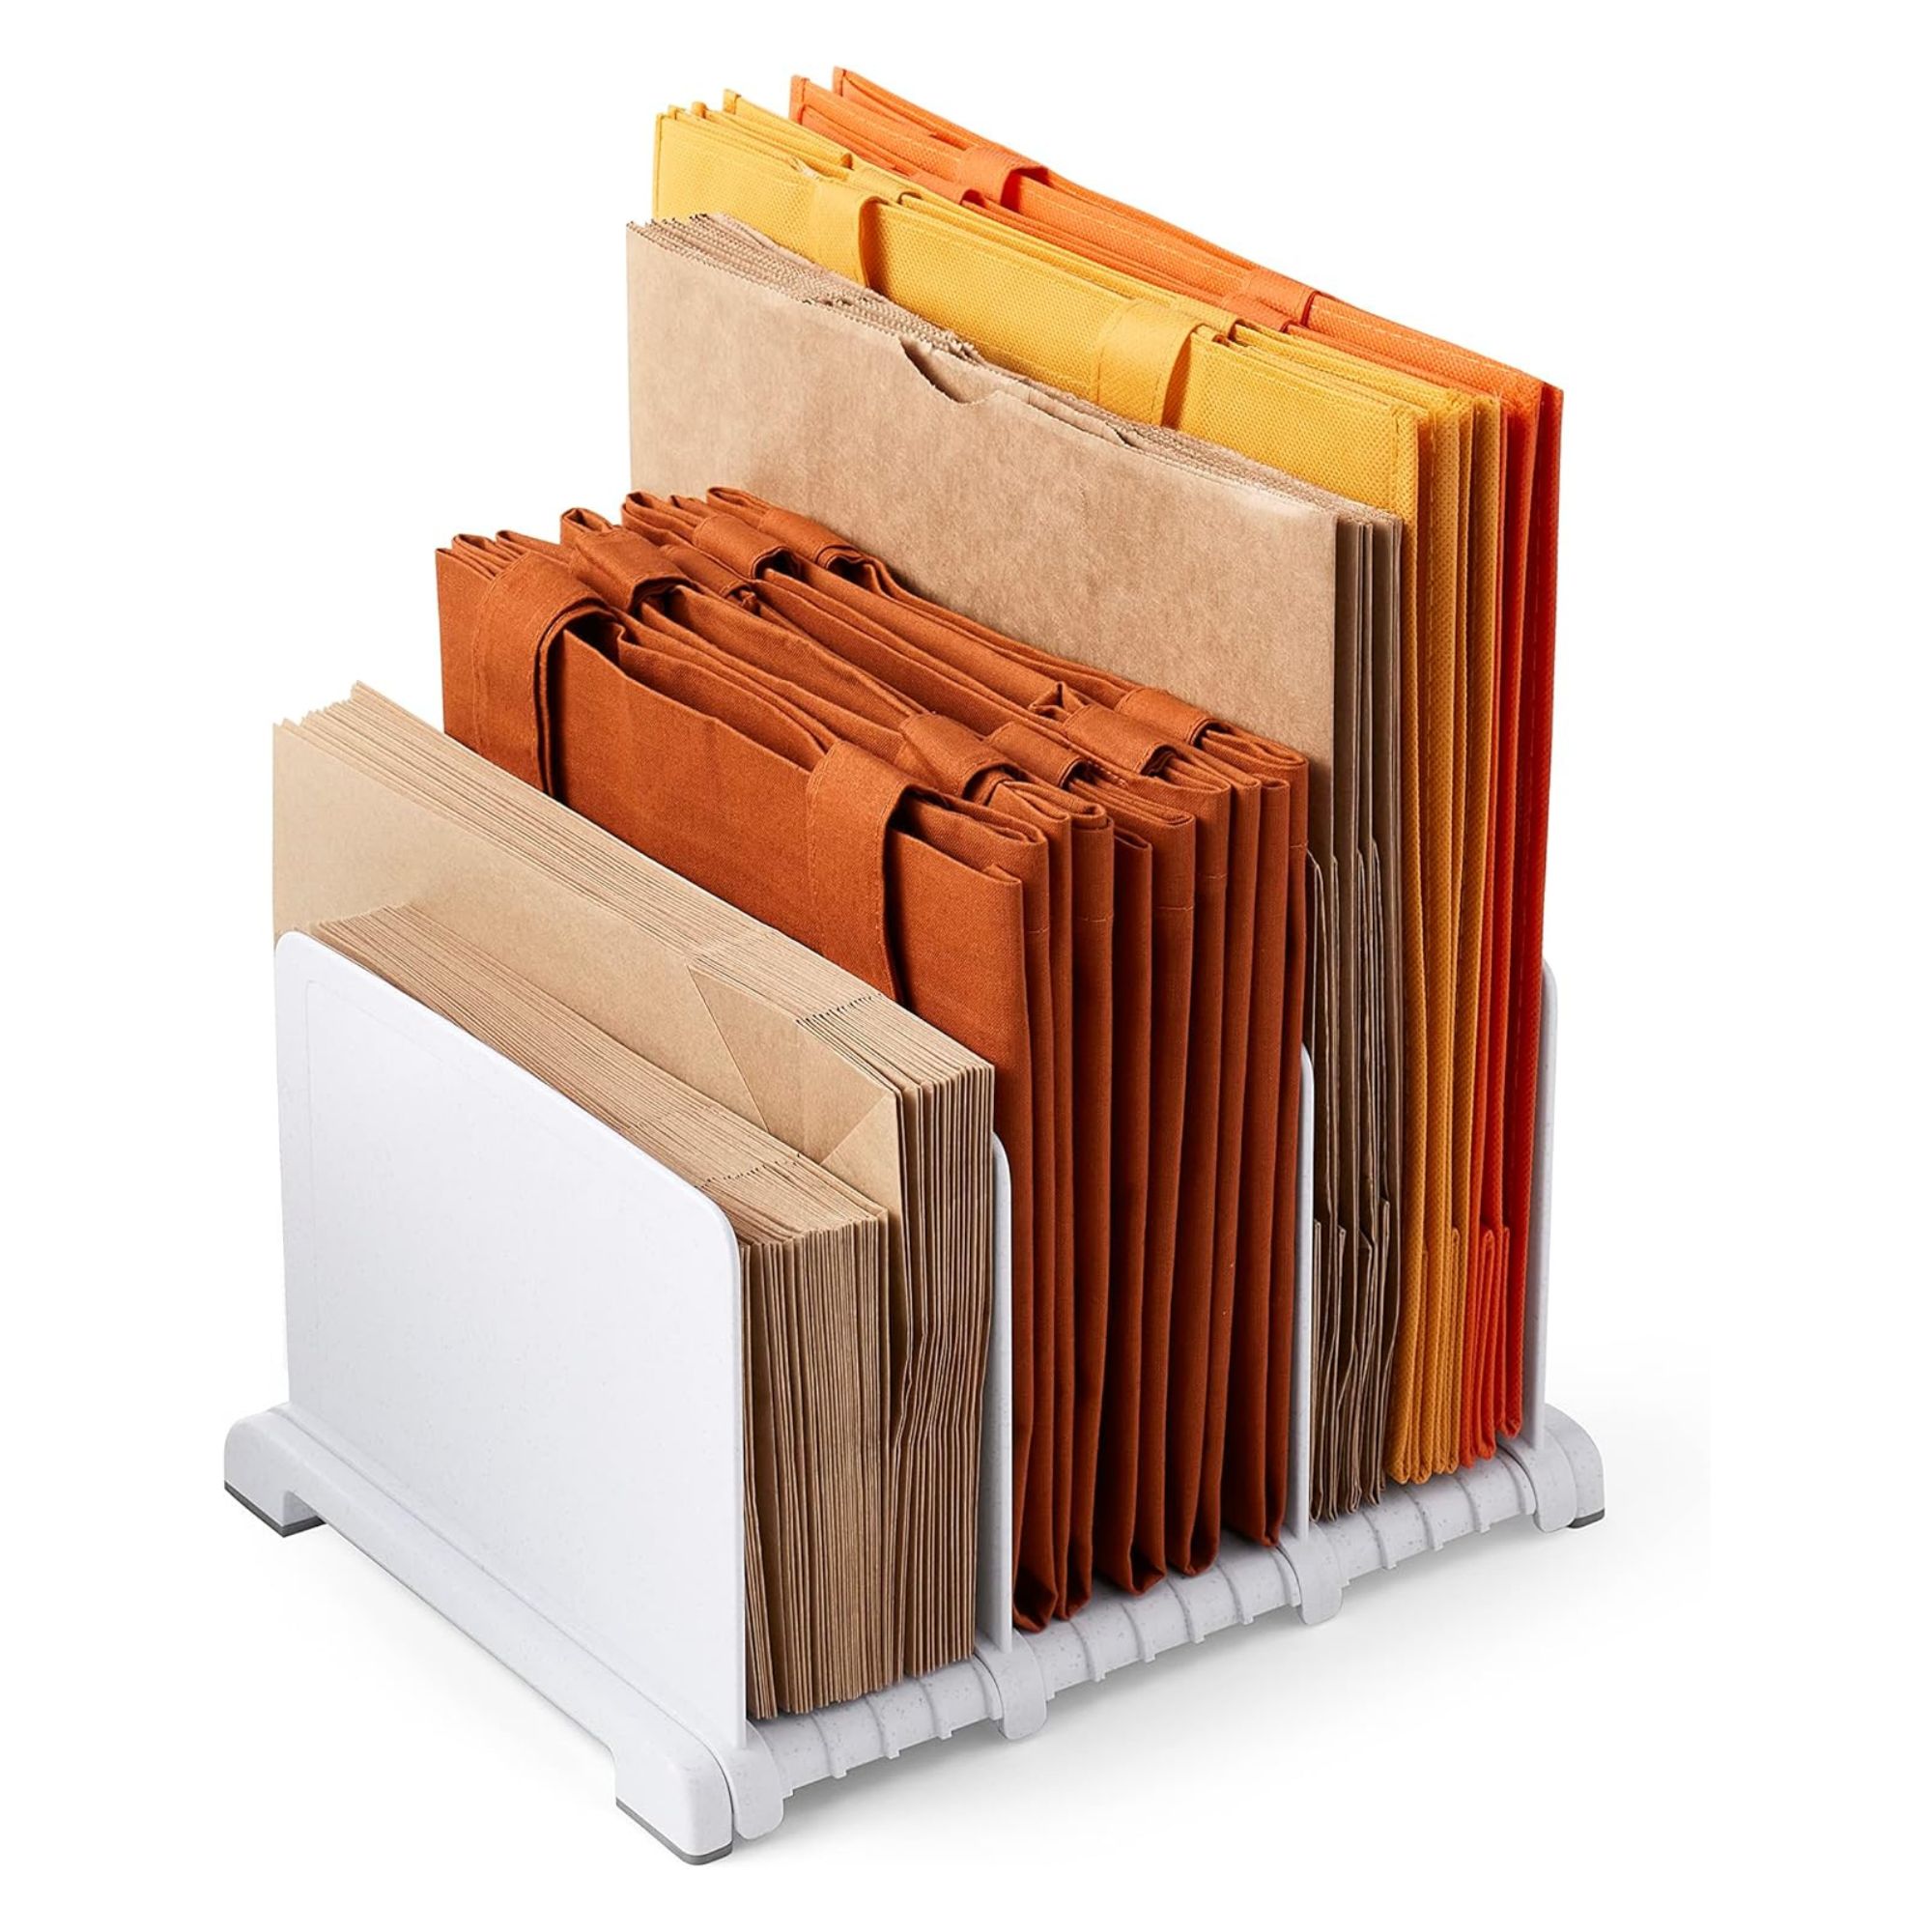 A white gift bag organizer with various orange and brown colored paper bags stored inside